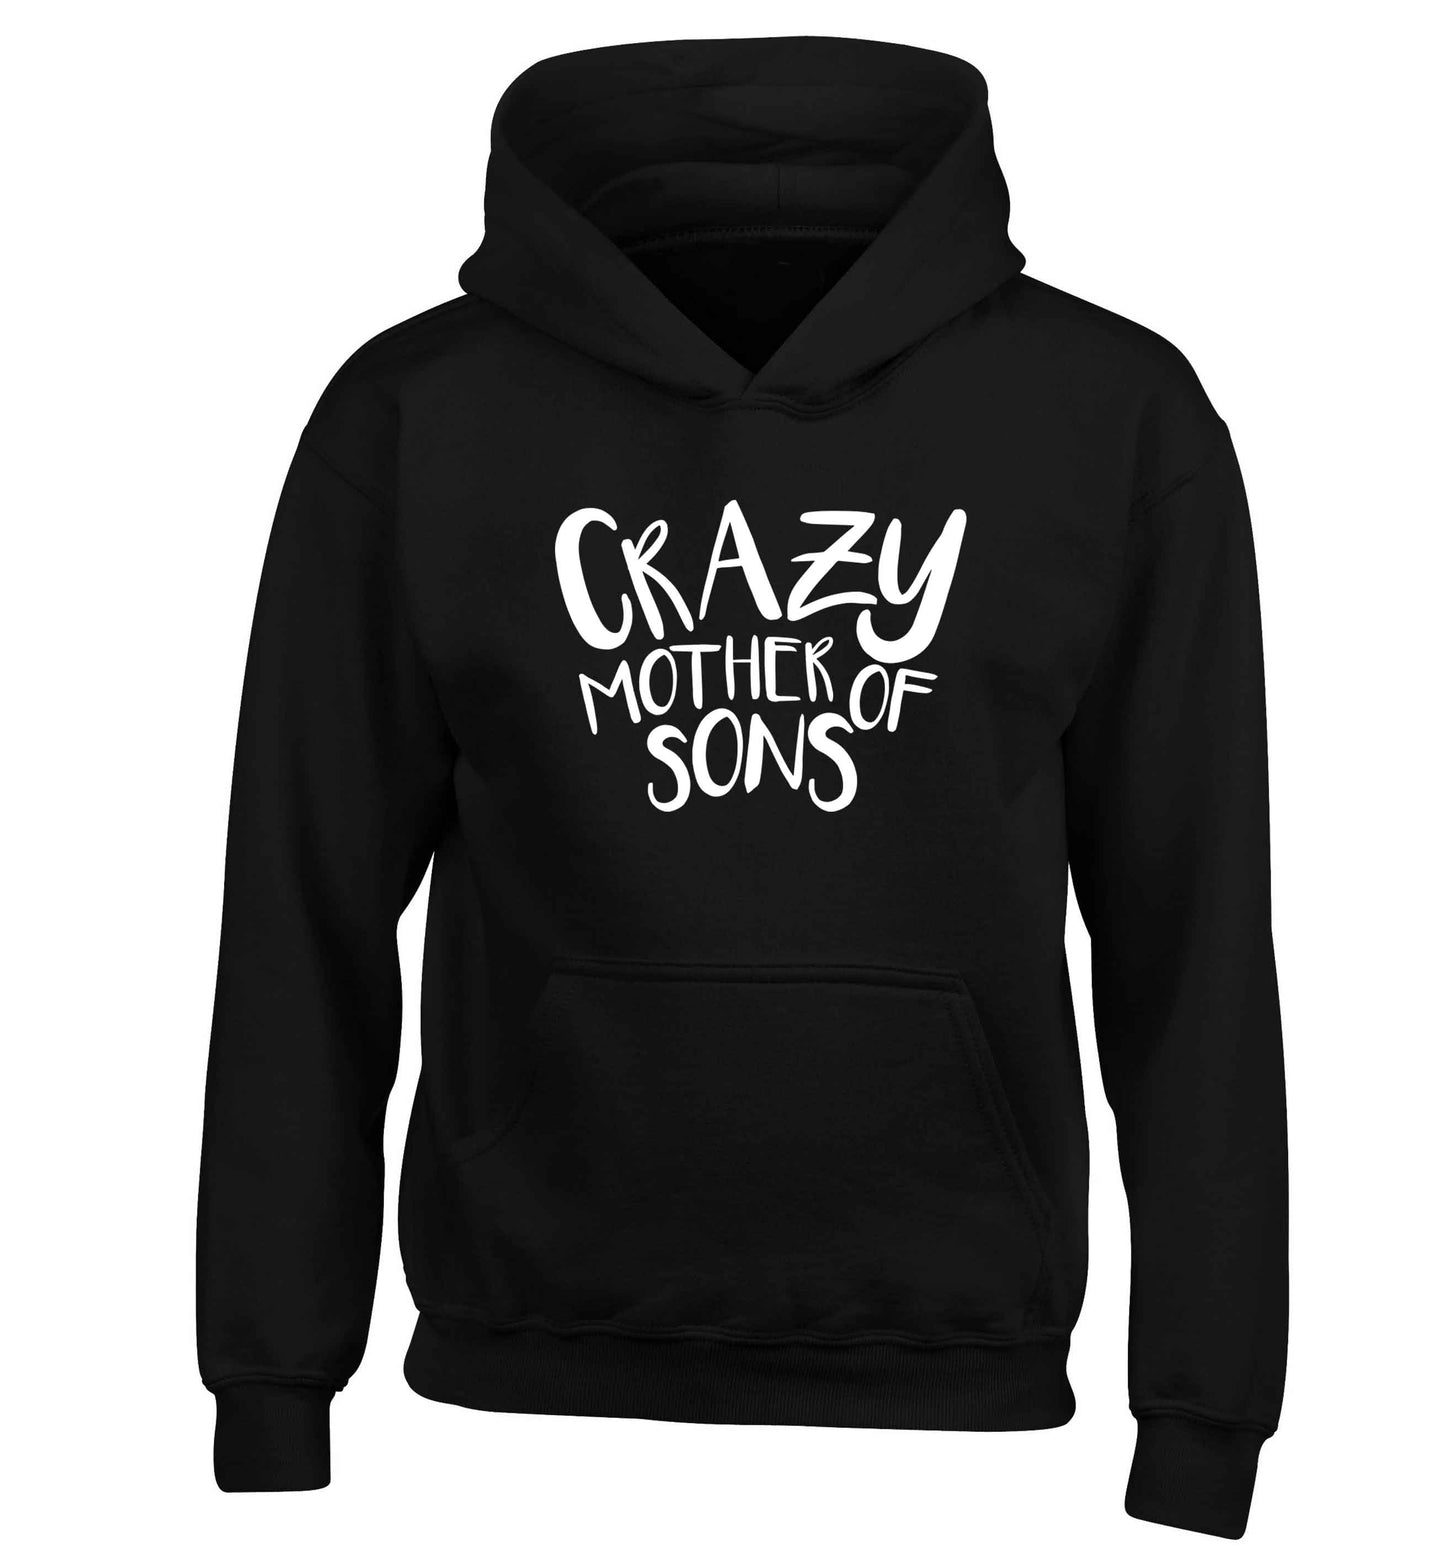 Crazy mother of sons children's black hoodie 12-13 Years